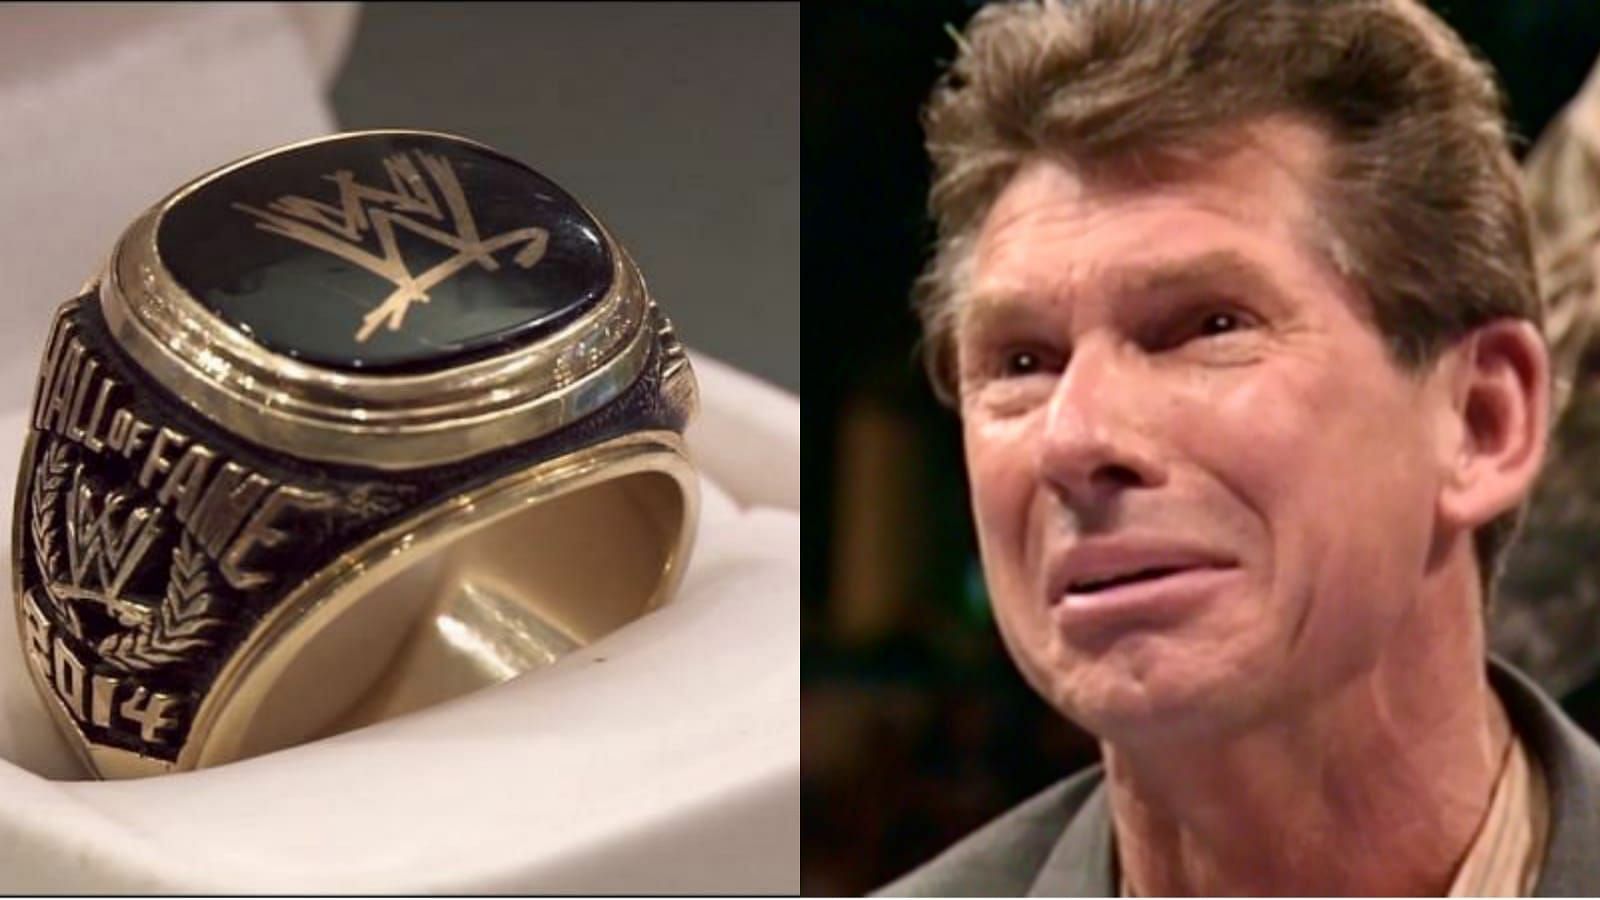 Vince McMahon recently stepped down as WWE